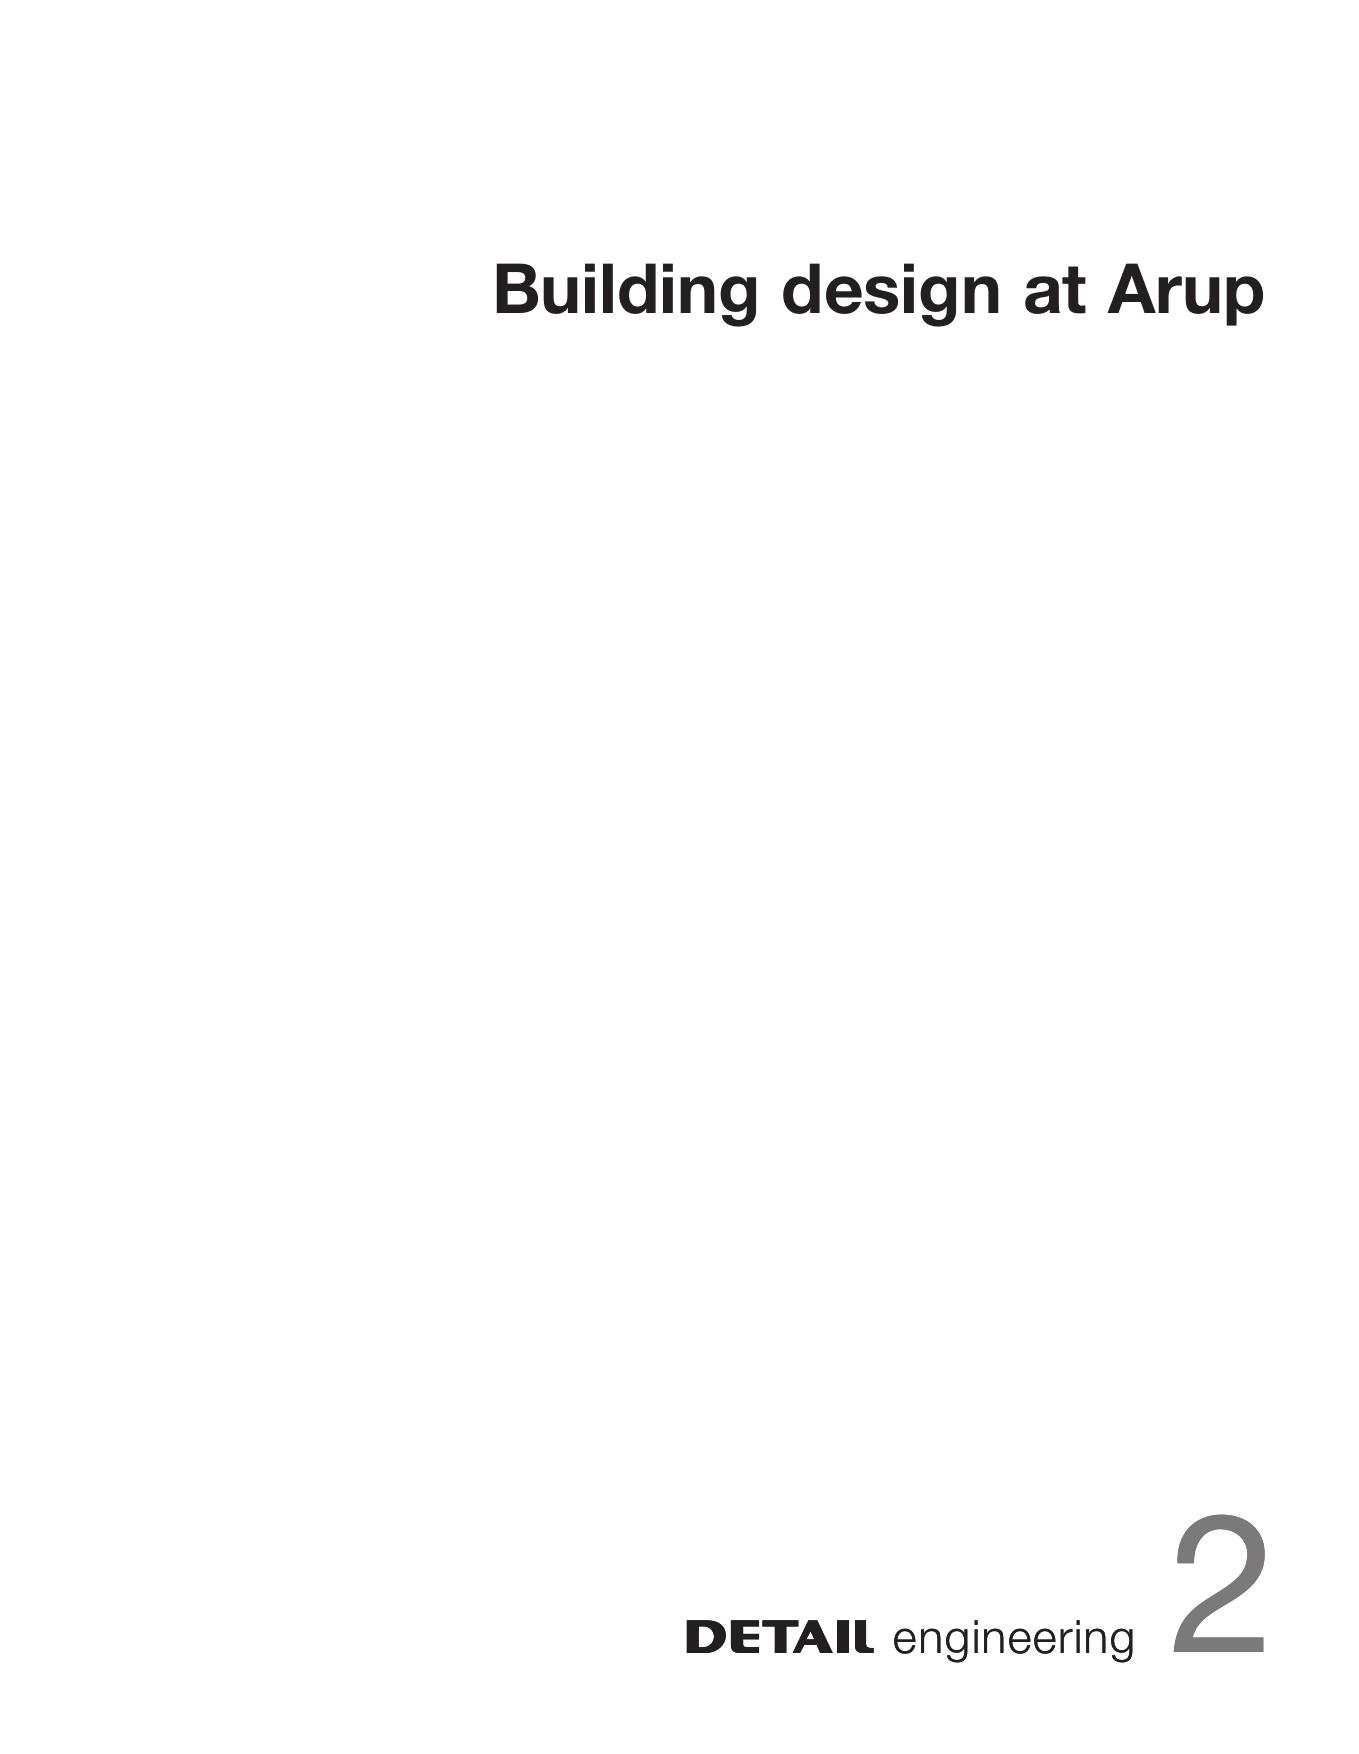 Building Design at Arup by Christian Brensing; Christian Schittich